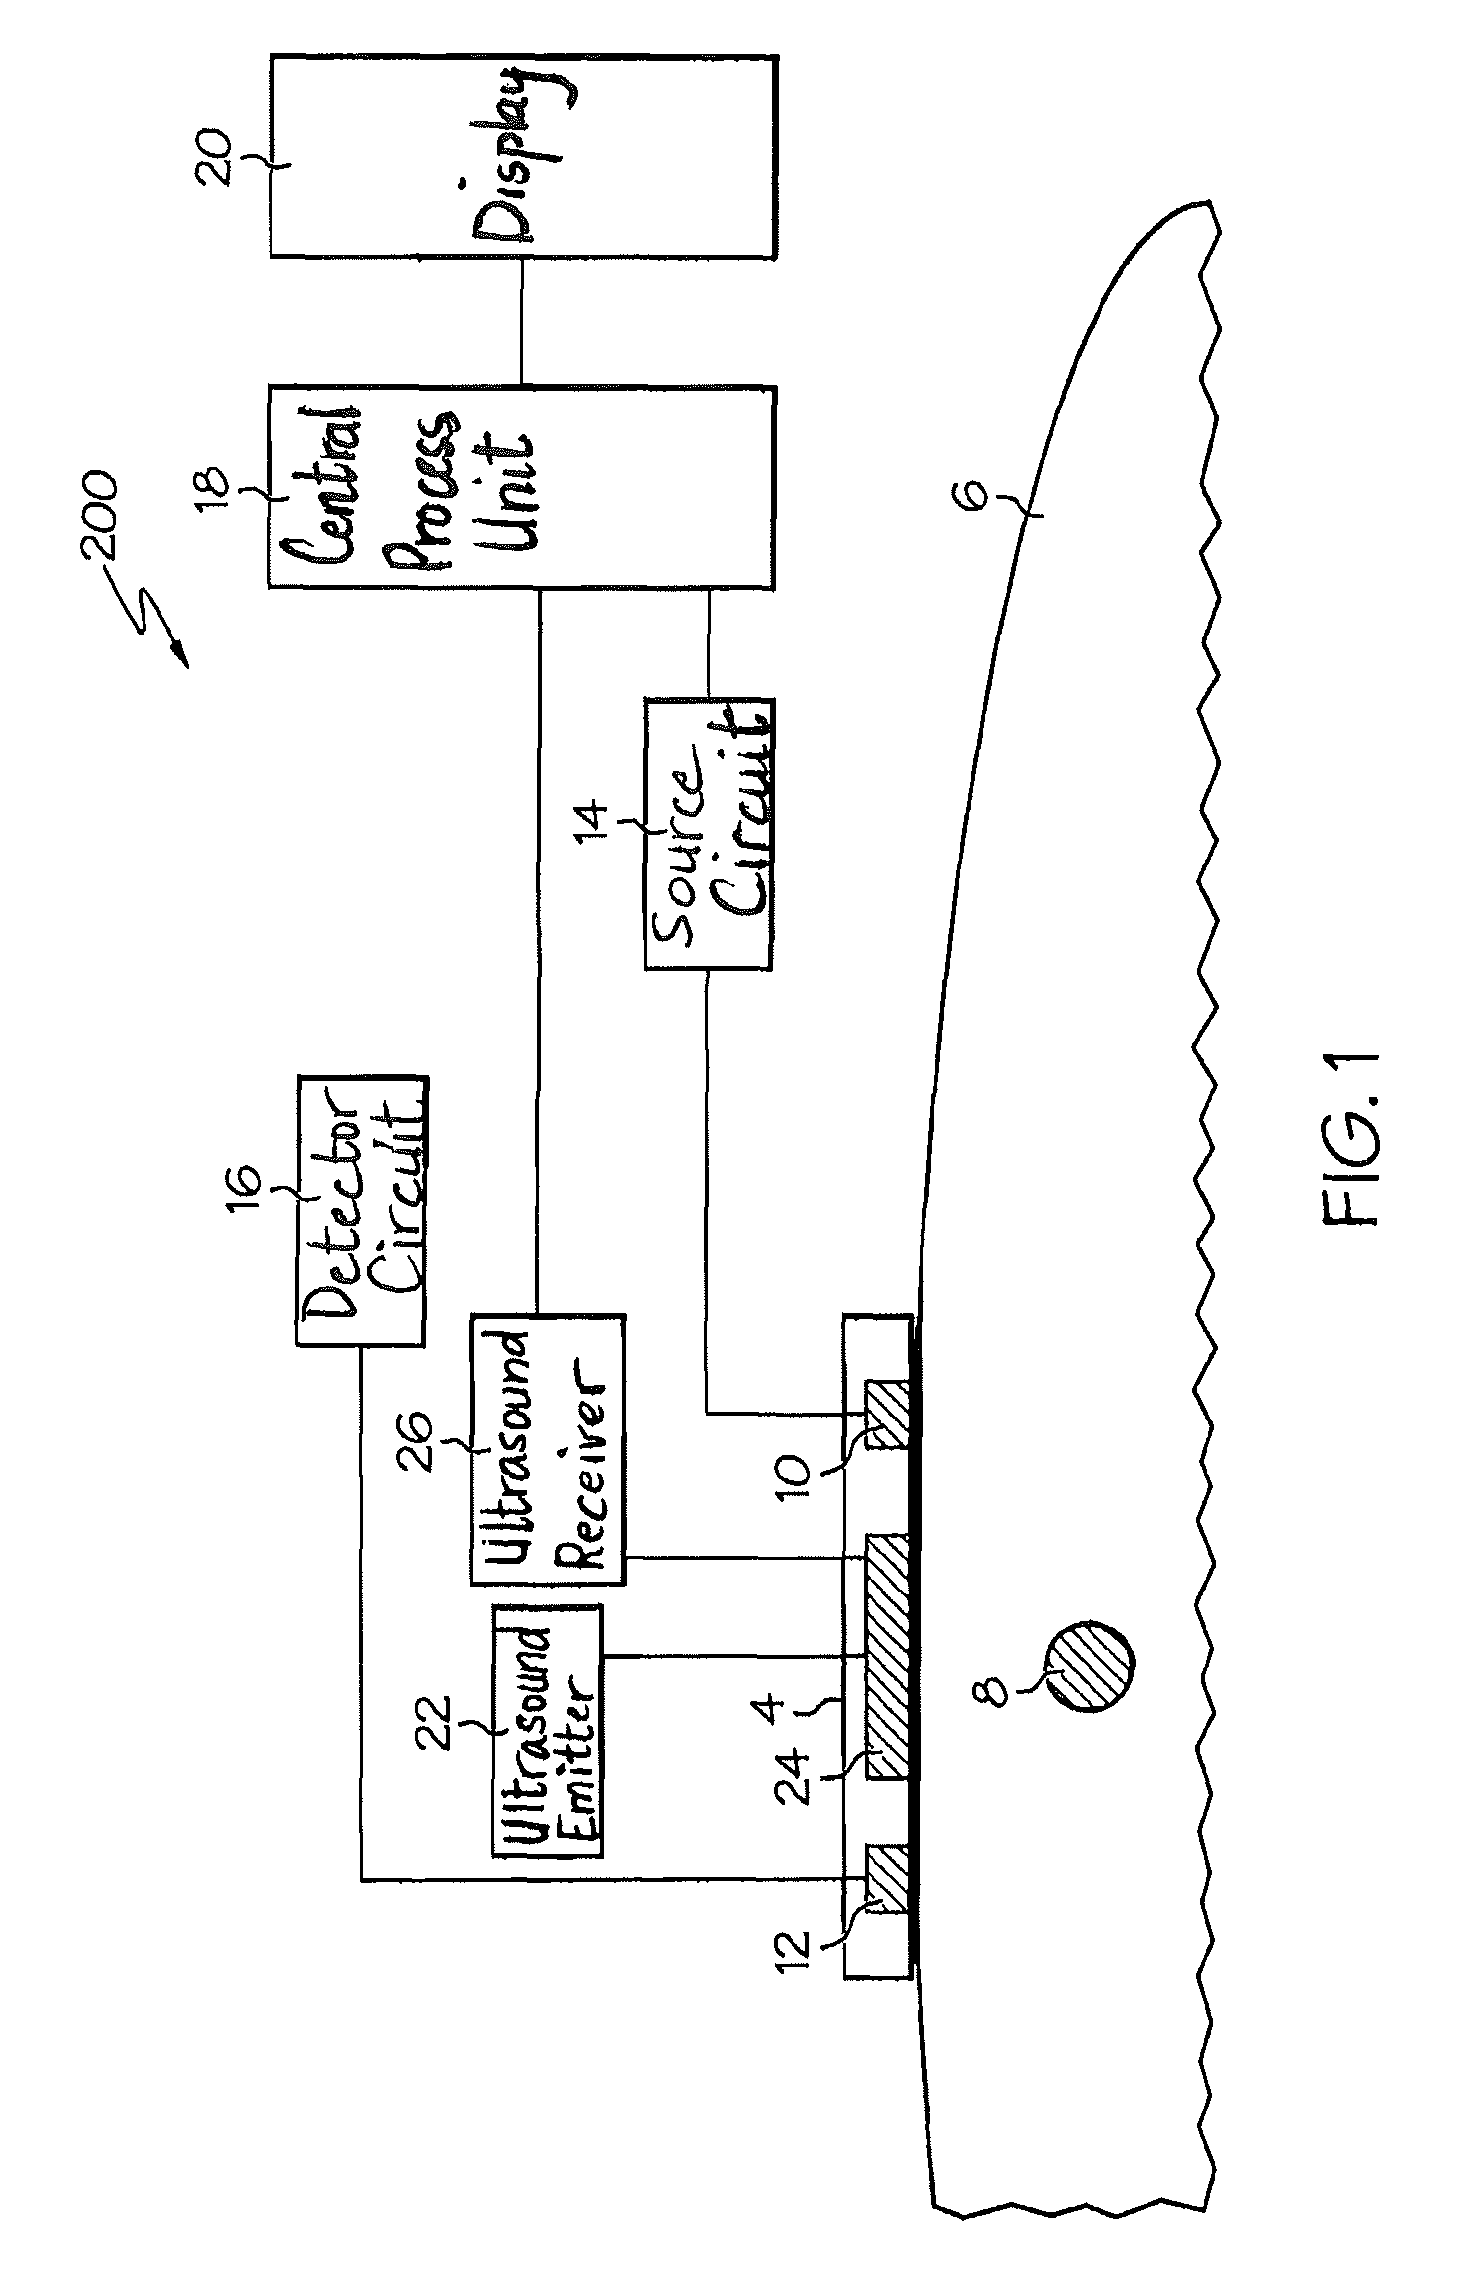 Method and apparatus for medical imaging using near-infrared optical tomography and fluorescence tomography combined with ultrasound